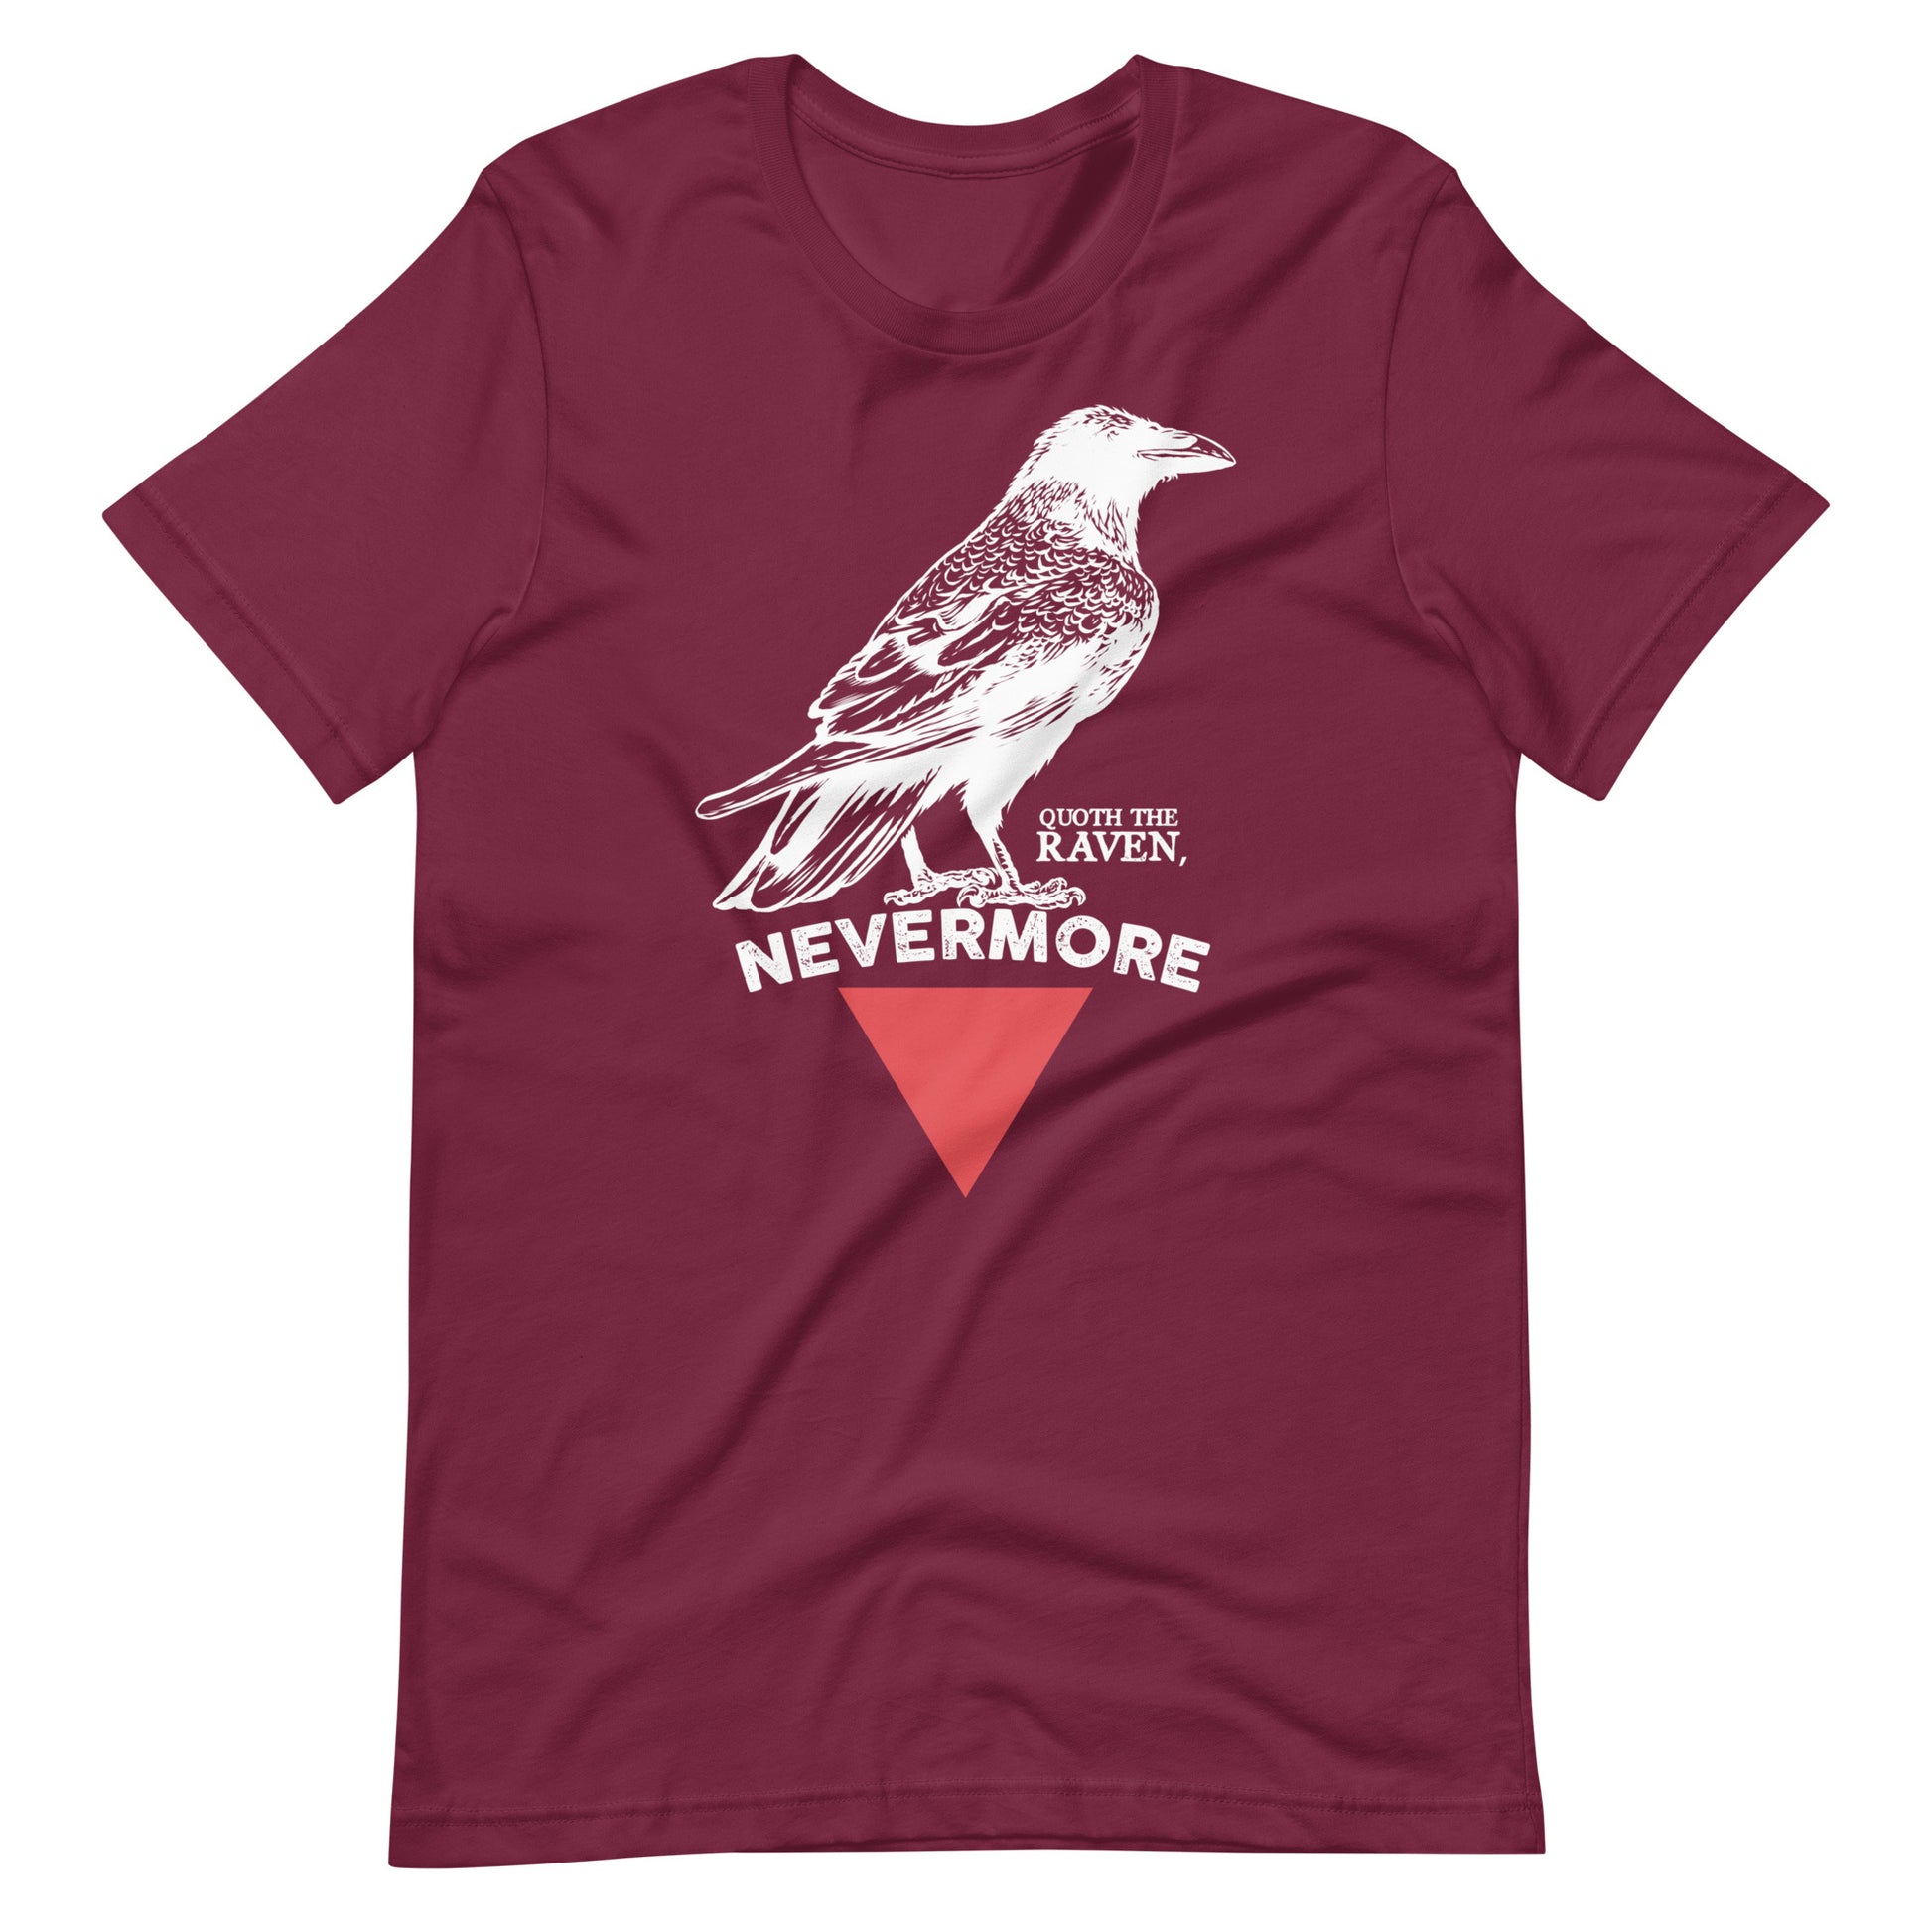 The Raven Nevermore Triangle - Men's t-shirt - Maroon Front